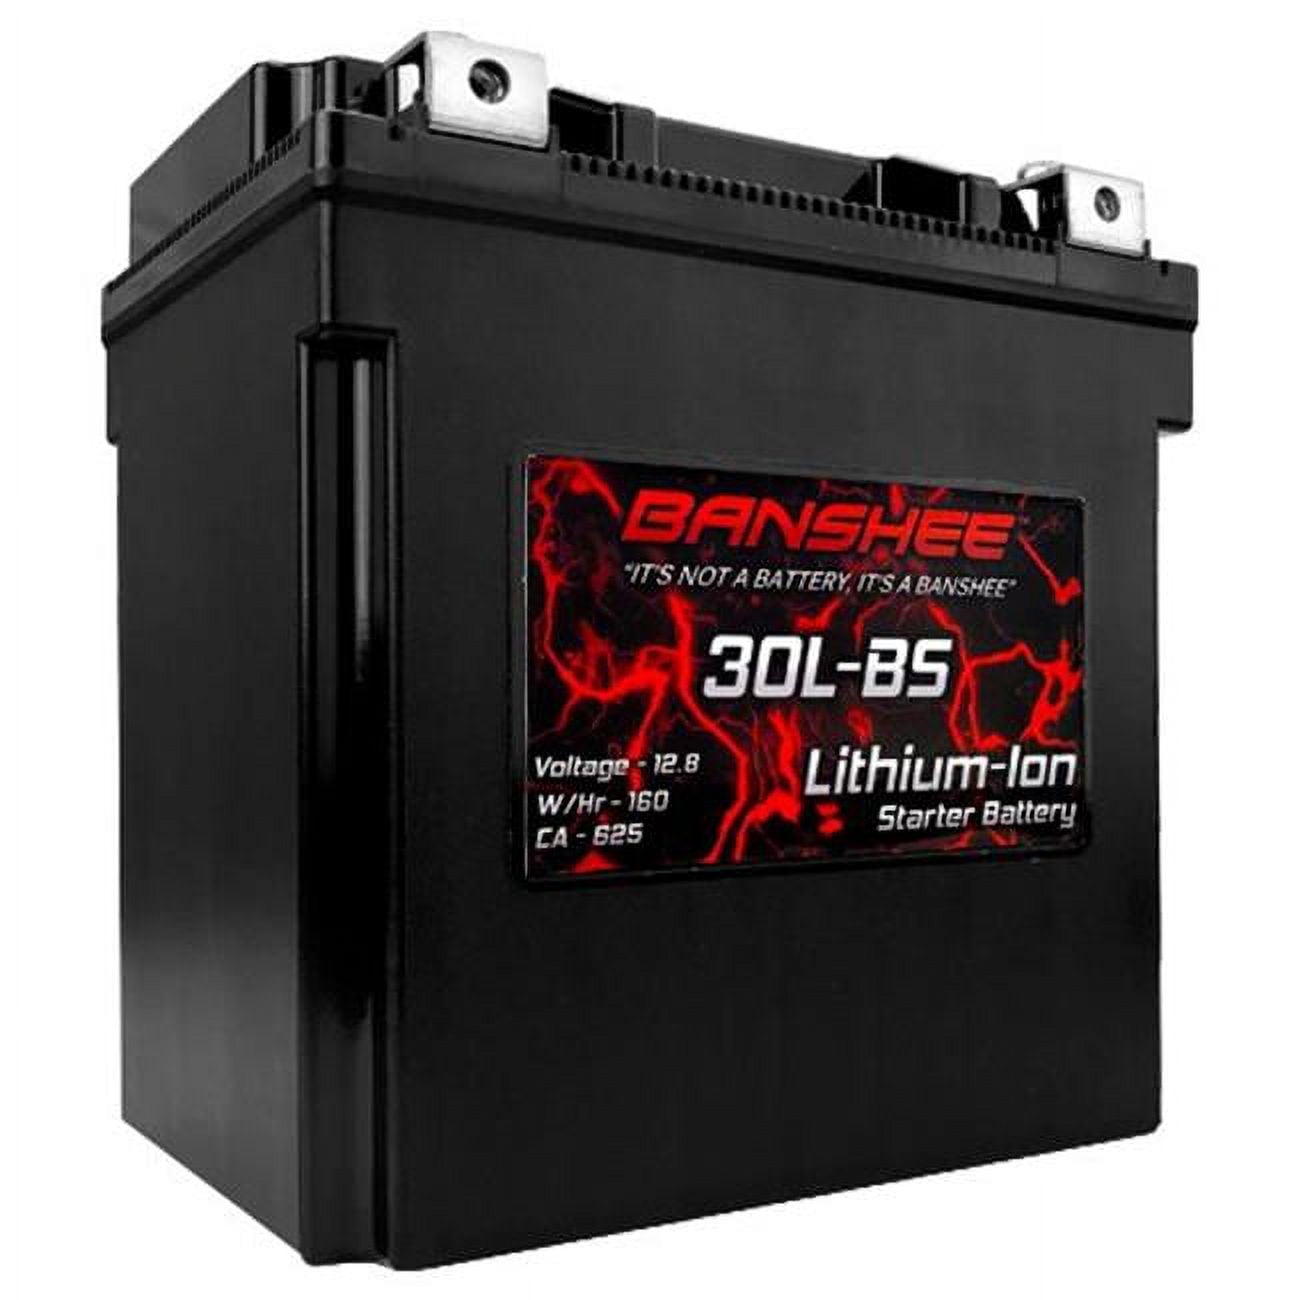 Picture of Banshee DLFP30L-BS-DS3 12.8V Lithium Motorcycle Battery for YTX30L-BS